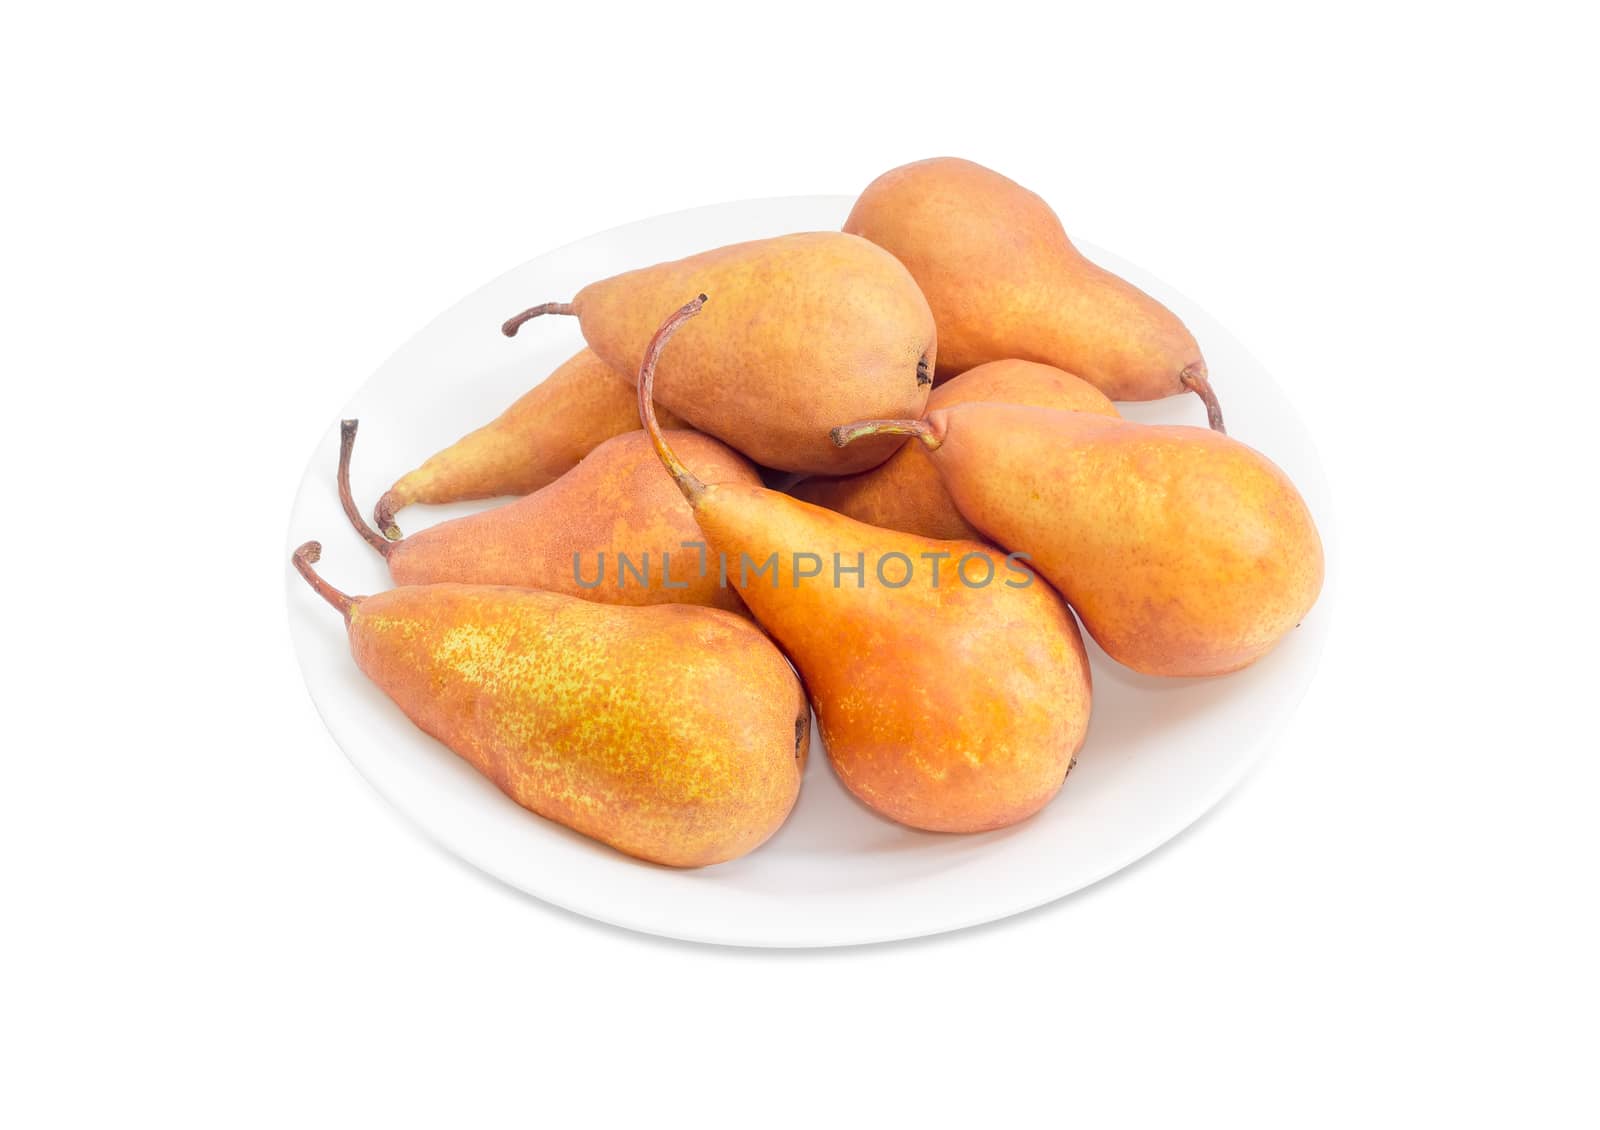 Several Bosc pears on a white dish by anmbph